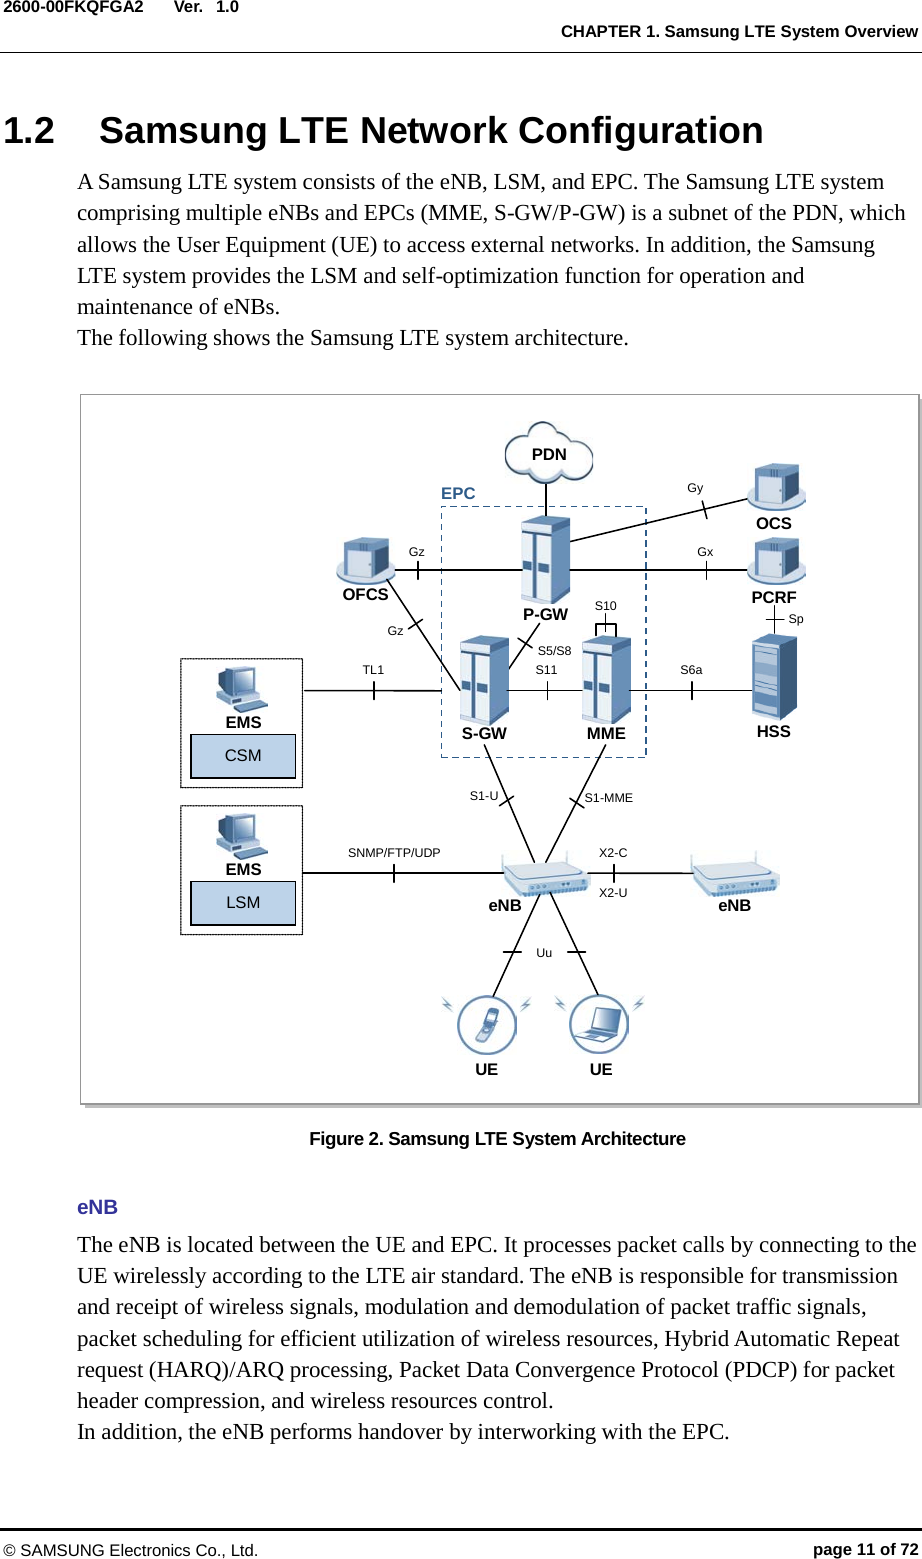  Ver.  CHAPTER 1. Samsung LTE System Overview 2600-00FKQFGA2 1.0 1.2 Samsung LTE Network Configuration   A Samsung LTE system consists of the eNB, LSM, and EPC. The Samsung LTE system comprising multiple eNBs and EPCs (MME, S-GW/P-GW) is a subnet of the PDN, which allows the User Equipment (UE) to access external networks. In addition, the Samsung LTE system provides the LSM and self-optimization function for operation and maintenance of eNBs. The following shows the Samsung LTE system architecture.  Figure 2. Samsung LTE System Architecture  eNB The eNB is located between the UE and EPC. It processes packet calls by connecting to the UE wirelessly according to the LTE air standard. The eNB is responsible for transmission and receipt of wireless signals, modulation and demodulation of packet traffic signals, packet scheduling for efficient utilization of wireless resources, Hybrid Automatic Repeat request (HARQ)/ARQ processing, Packet Data Convergence Protocol (PDCP) for packet header compression, and wireless resources control.   In addition, the eNB performs handover by interworking with the EPC.  UE UE OFCS PCRF HSS Uu S1-U  S1-MME EMS CSM eNB eNB EMS LSM OCS EPC S5/S8 Gx S-GW Sp TL1 MME P-GW Gy S11 S6a Gz Gz S10 PDN X2-C X2-U SNMP/FTP/UDP              © SAMSUNG Electronics Co., Ltd. page 11 of 72 